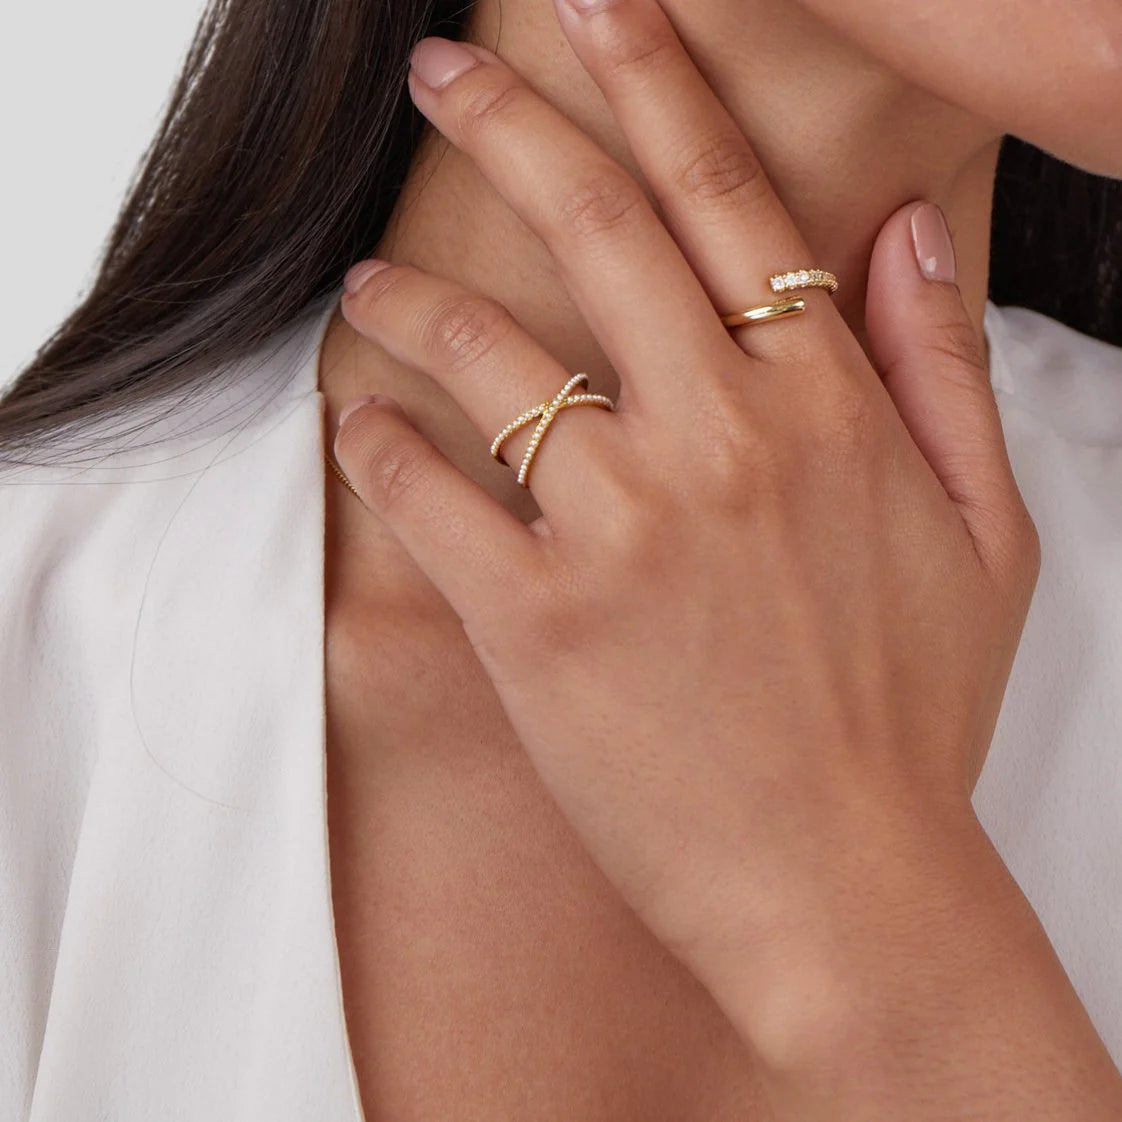 Gold & Pearl Infinity Ring